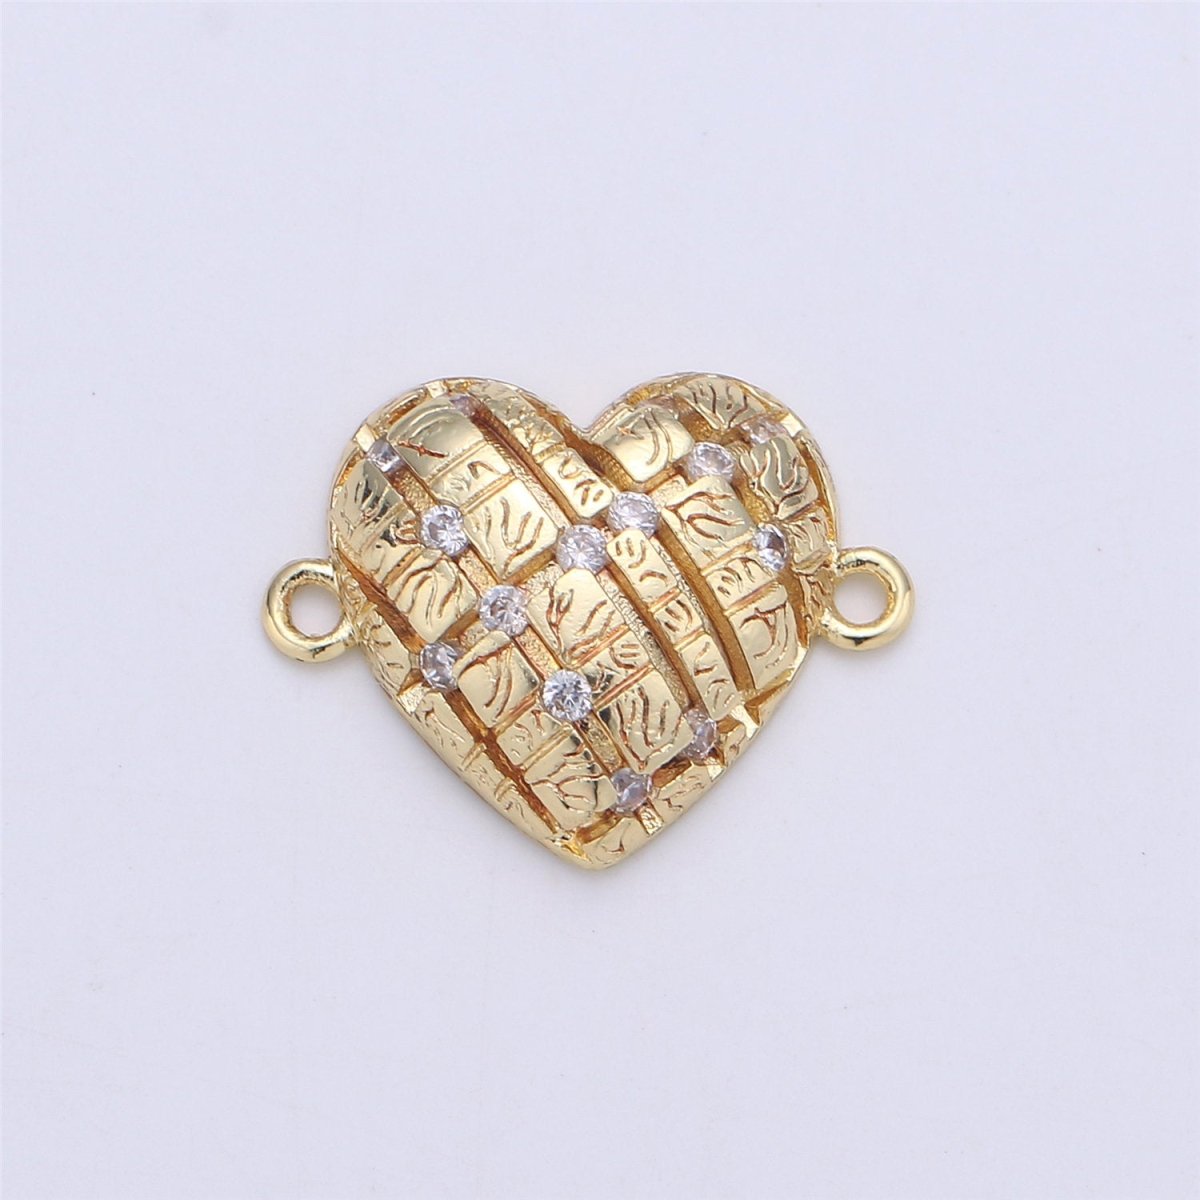 Gold Filled heart Charm Connector, Bracelet Connector, Cubic Heart armlet Connector, CZ Link Charm Jewelry Connector F-365 - DLUXCA